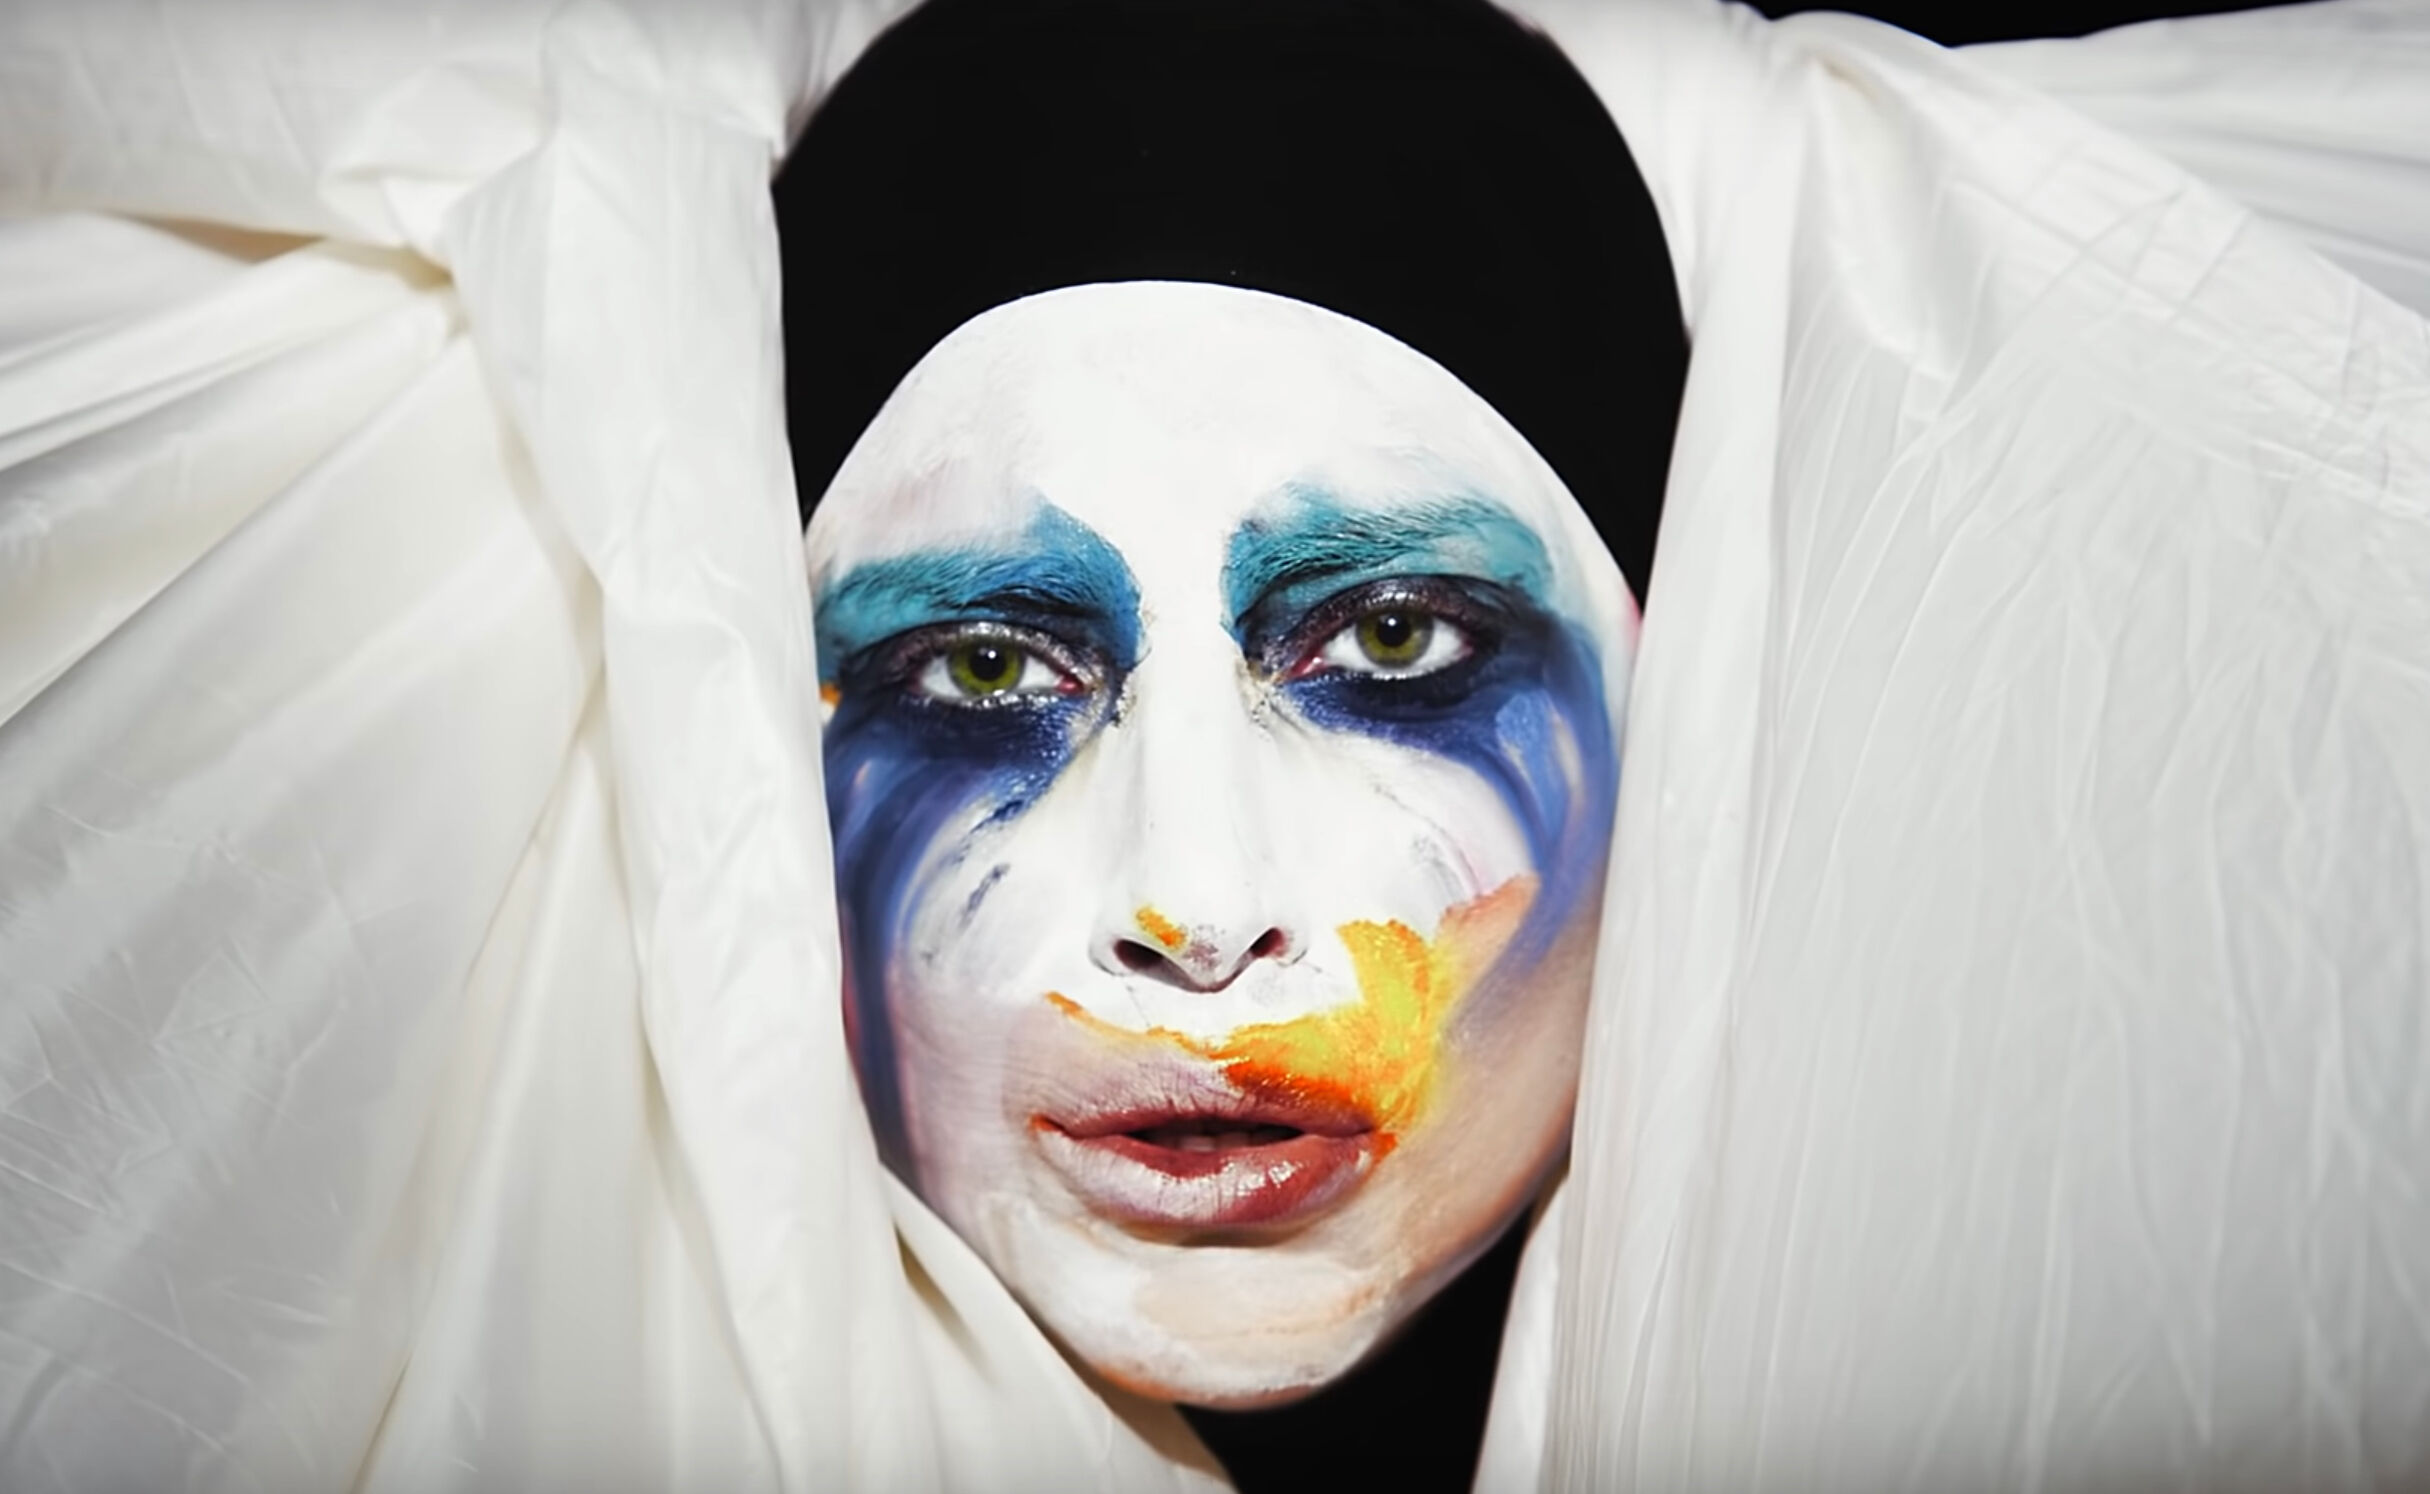 Lady Gaga in the "Applause" video.